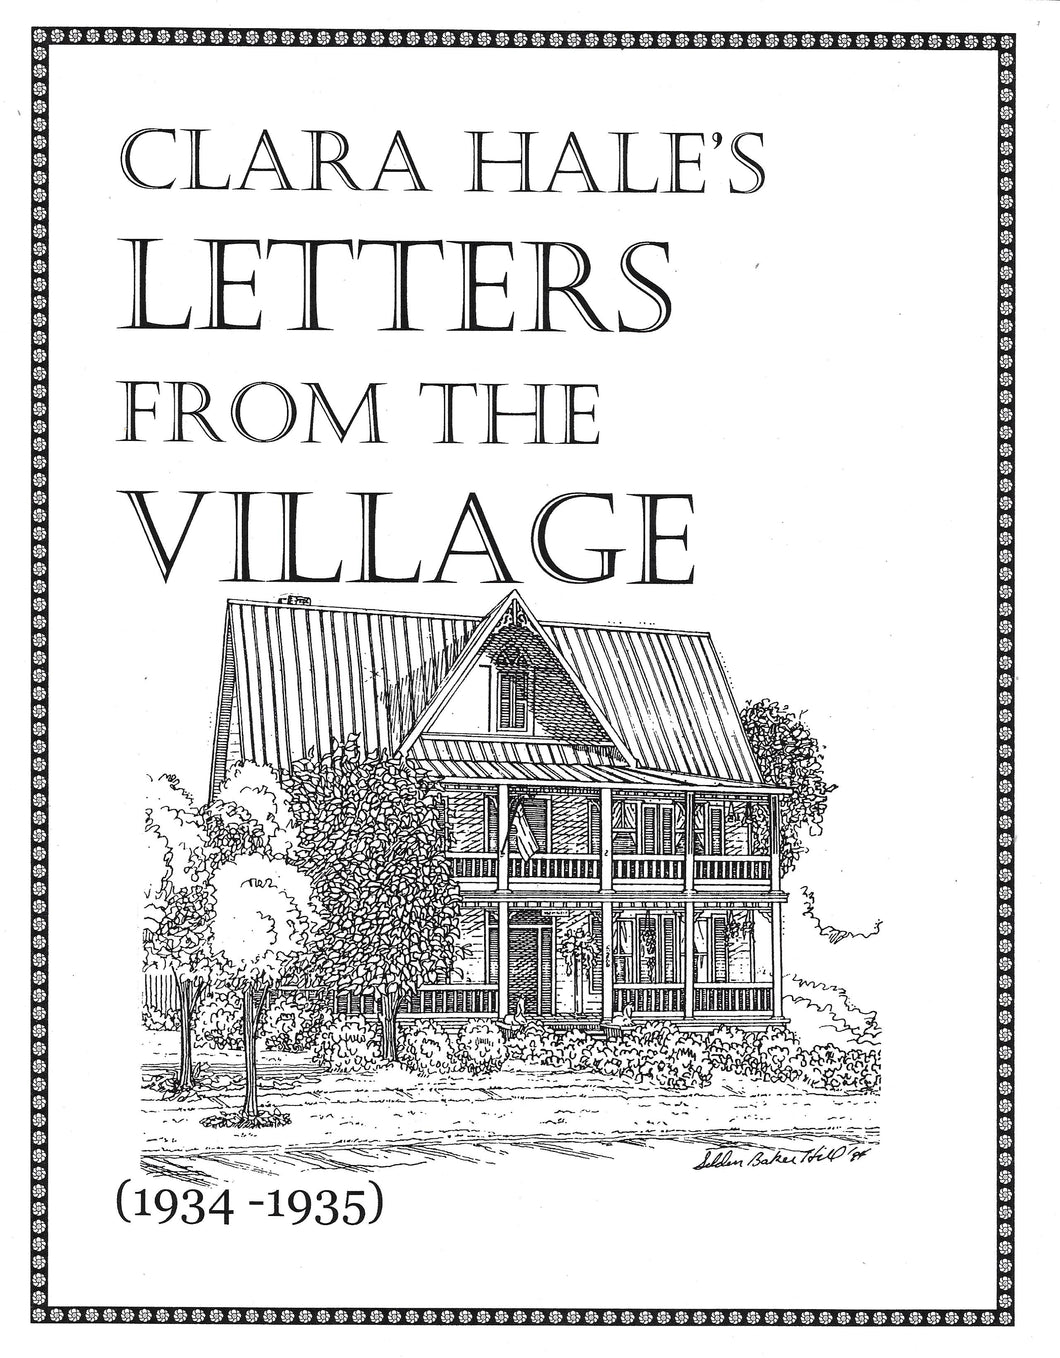 Clara Hale's Letters from the Village (1934-1935)